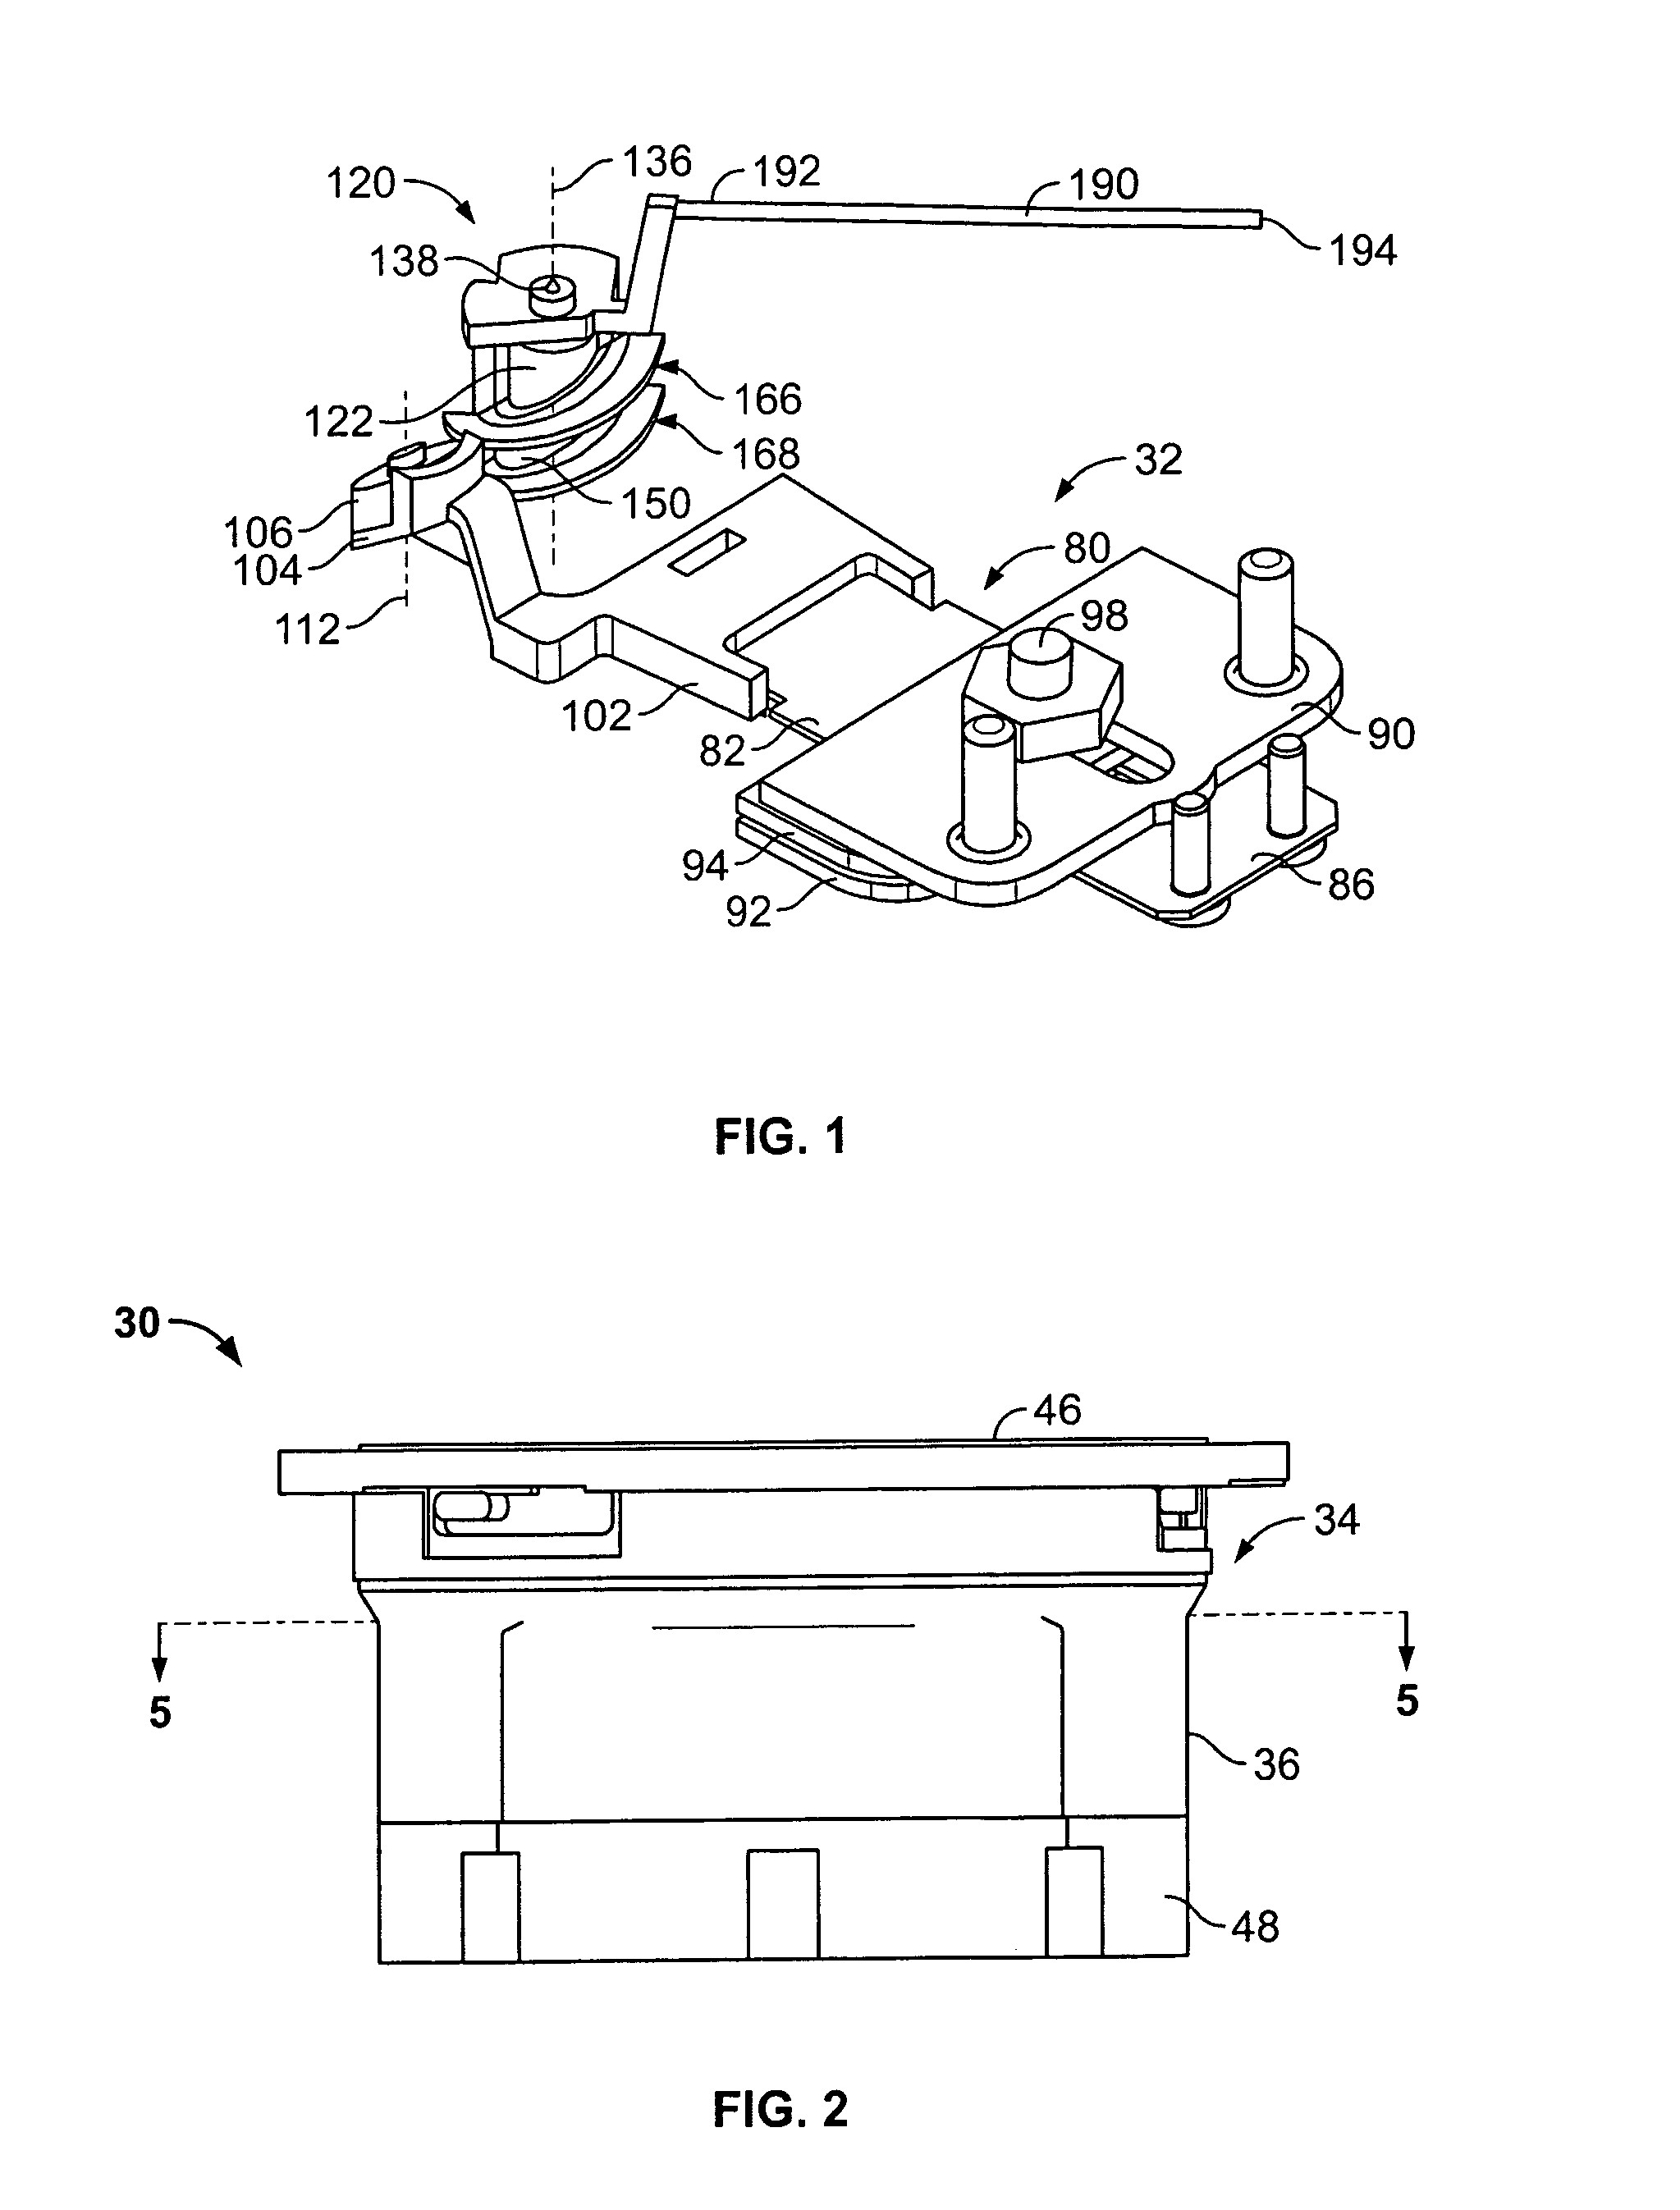 Gauge having a magnetically driven pointer rotation device